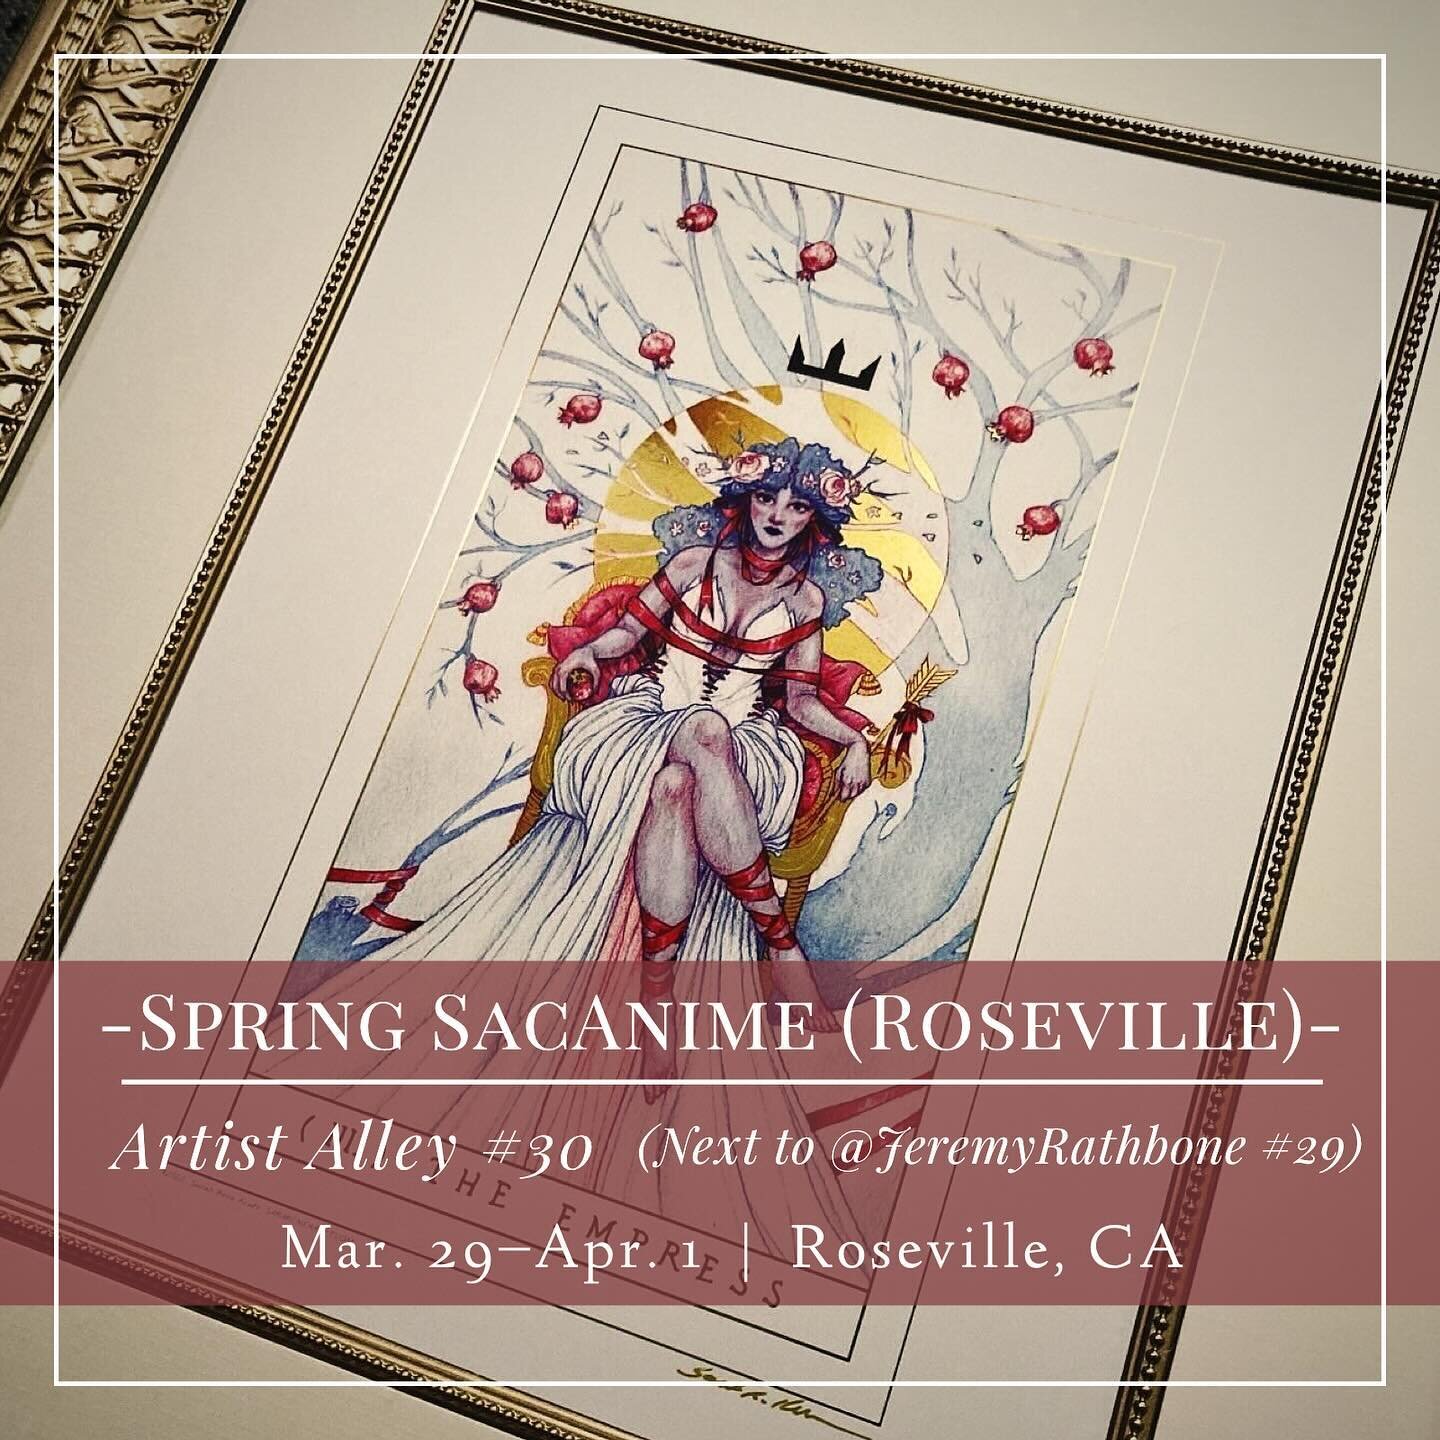 🌖 | Have I yet mentioned how hard it&rsquo;s been coming out of a recovery spell? (Oof!) come celebrate the Spring and my return to the land of the living at #SacAnime in #Roseville this weekend&mdash;Fri. 3/29 thru Sun. 4/1, at the Roseville County